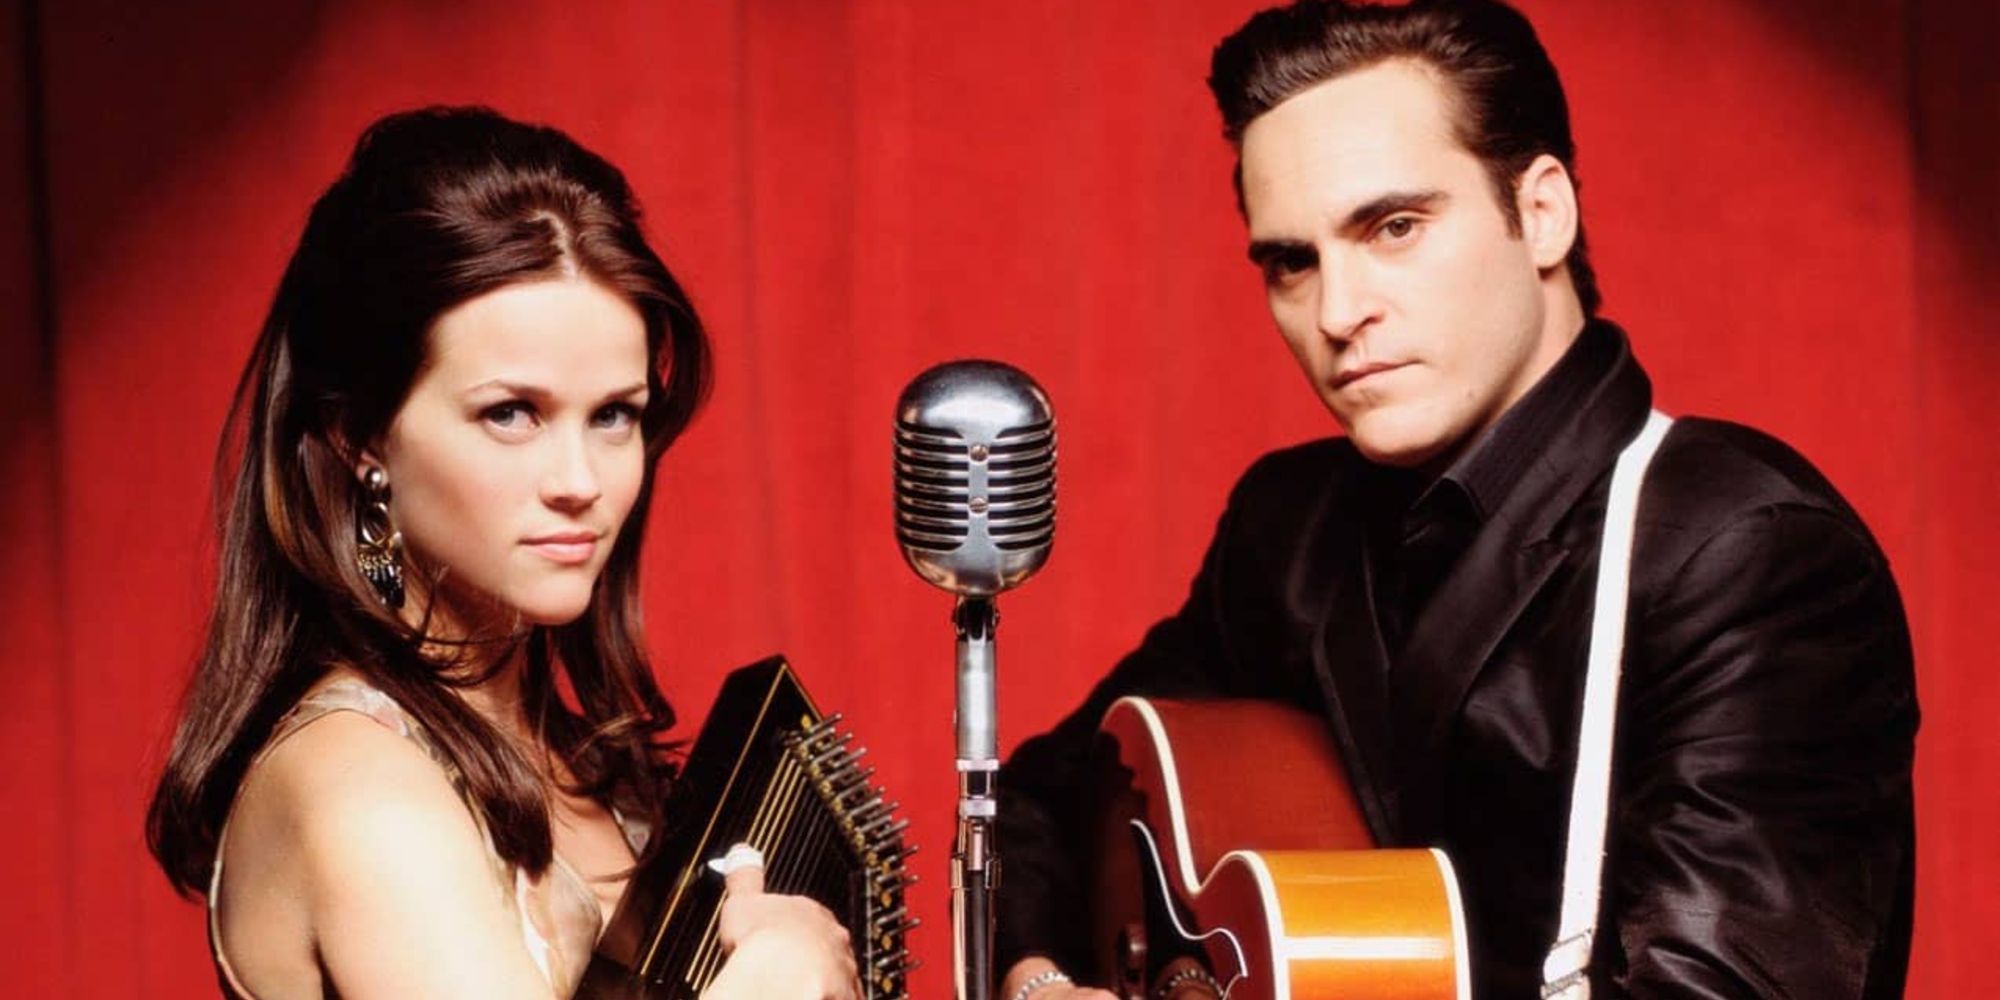 June Carter and Johnny Cash on stage in Walk the Line.